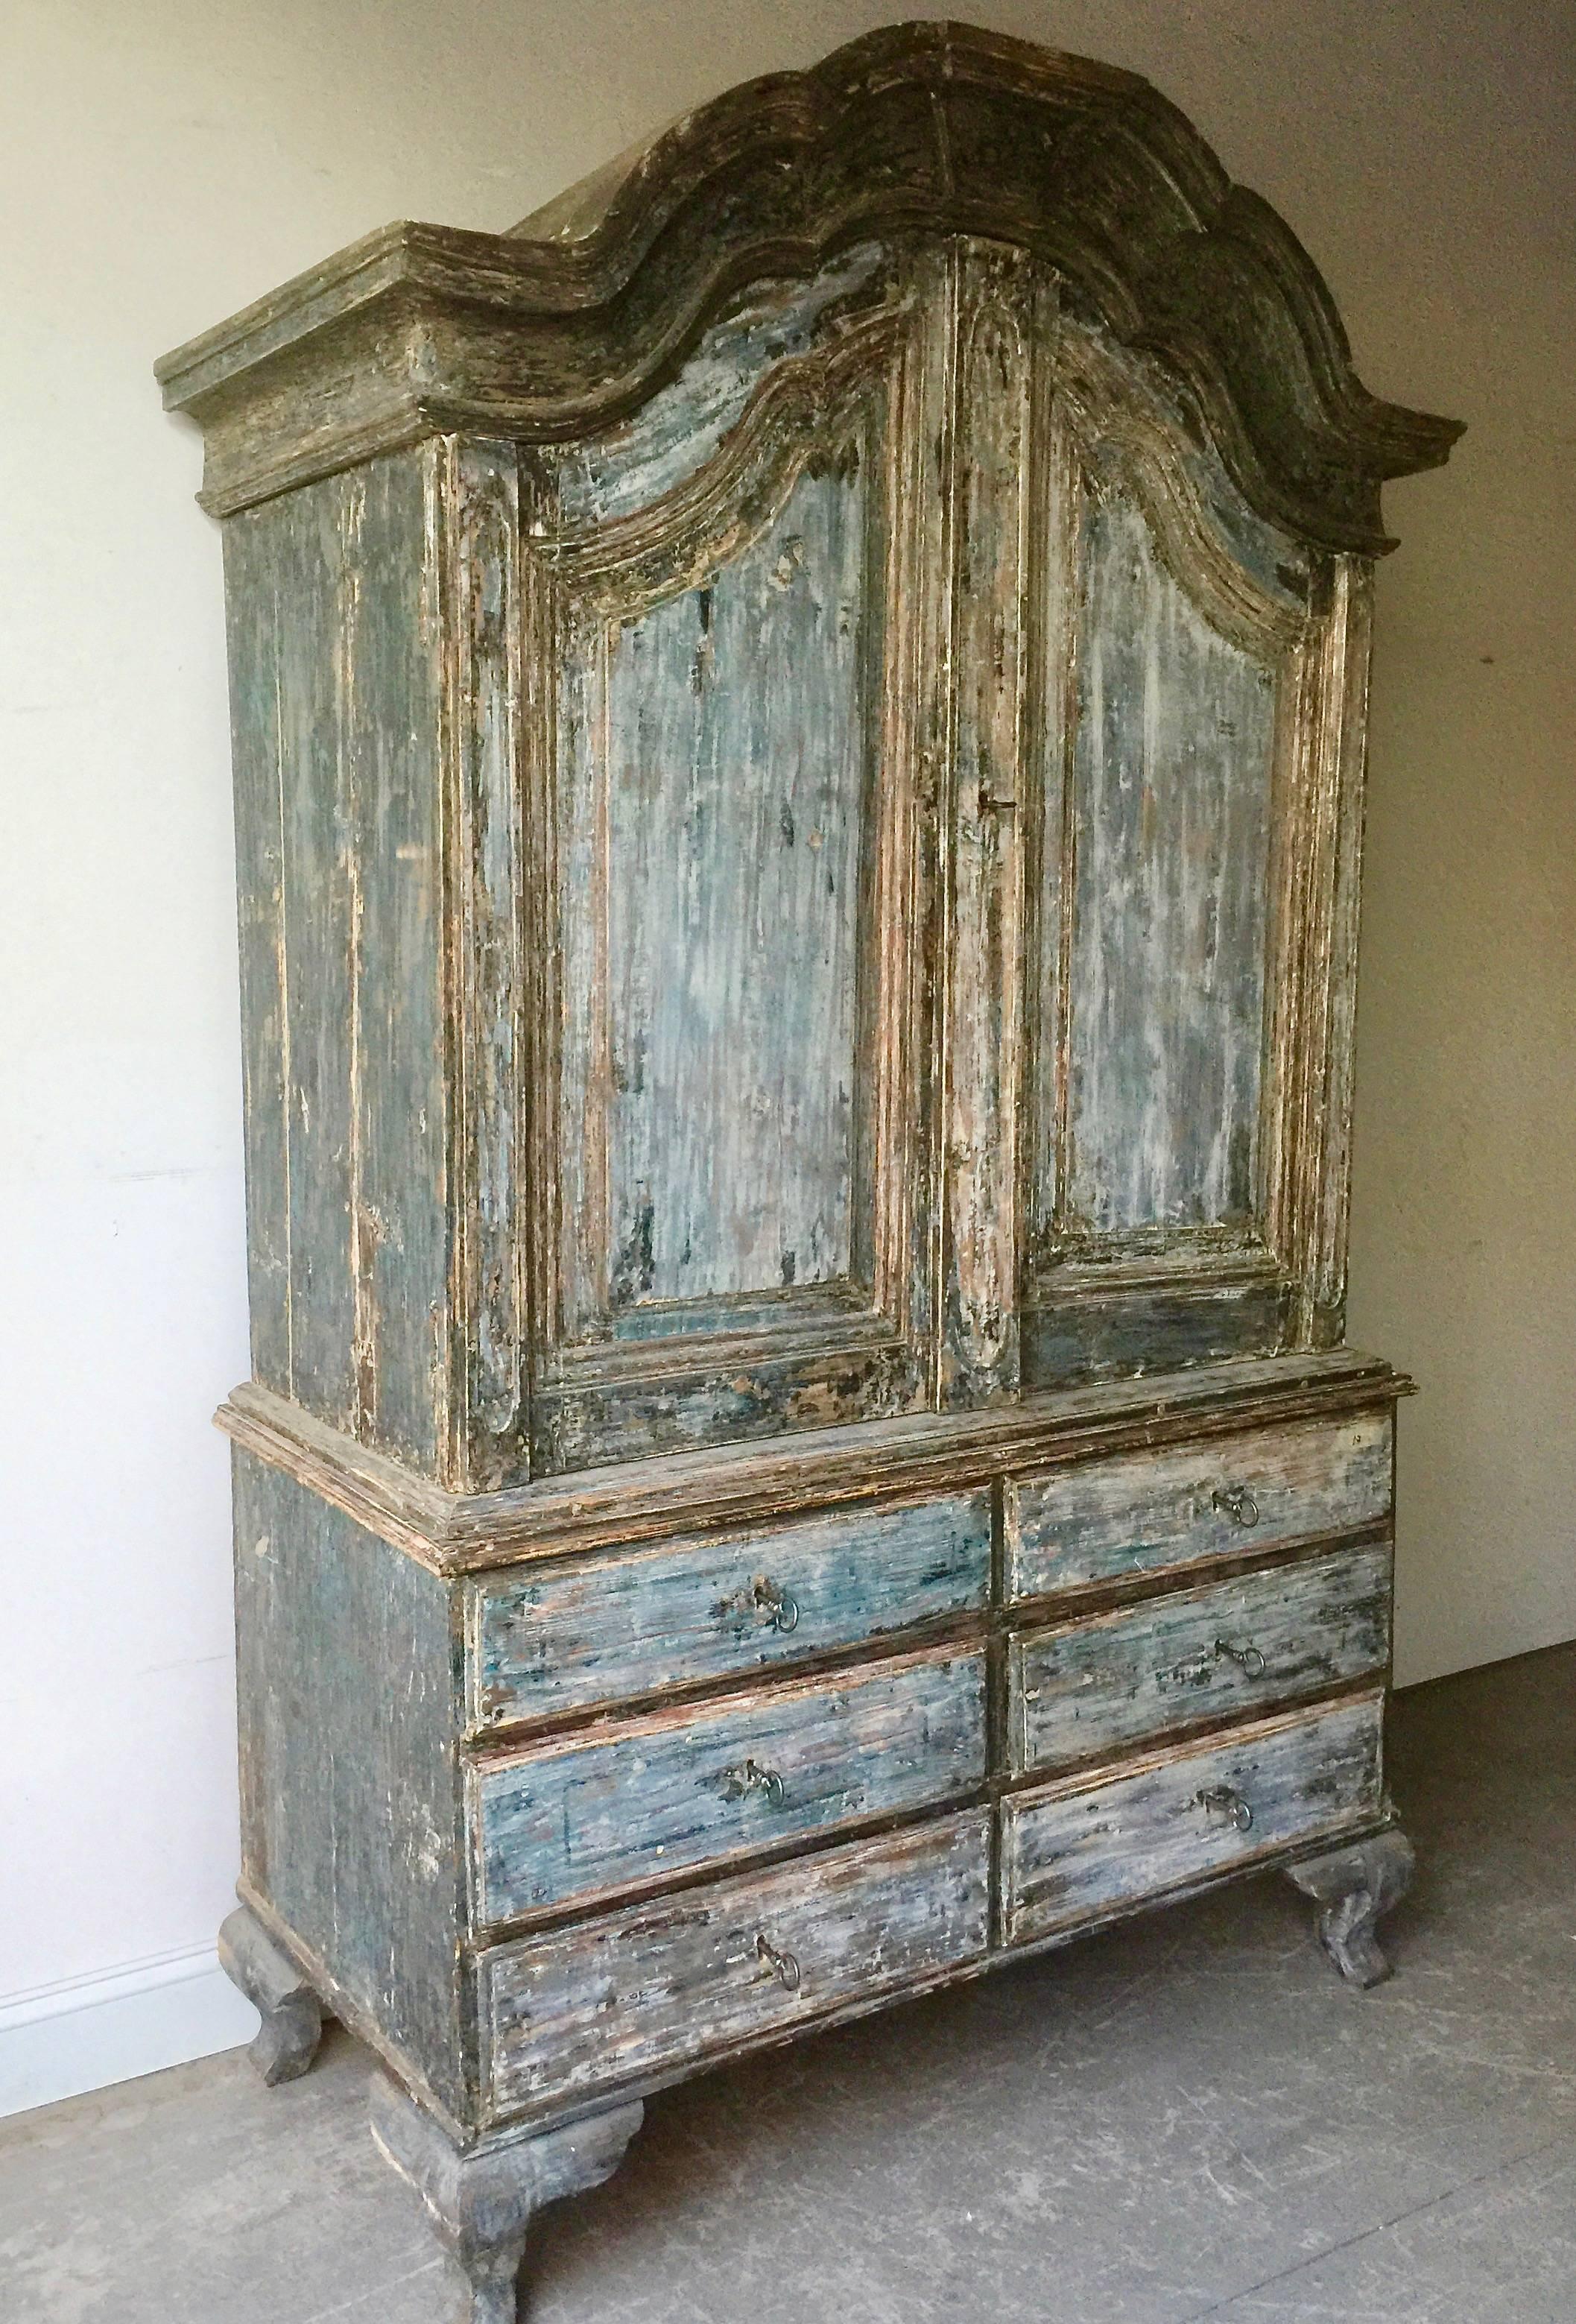 Original deep blue patinated 18th century Swedish Rococo period cabinet from Manor House, Stockholm, with wonderful arched cornice, original hardware, features two shelves and a notched spoon shelf in worn salmon color patina supported with